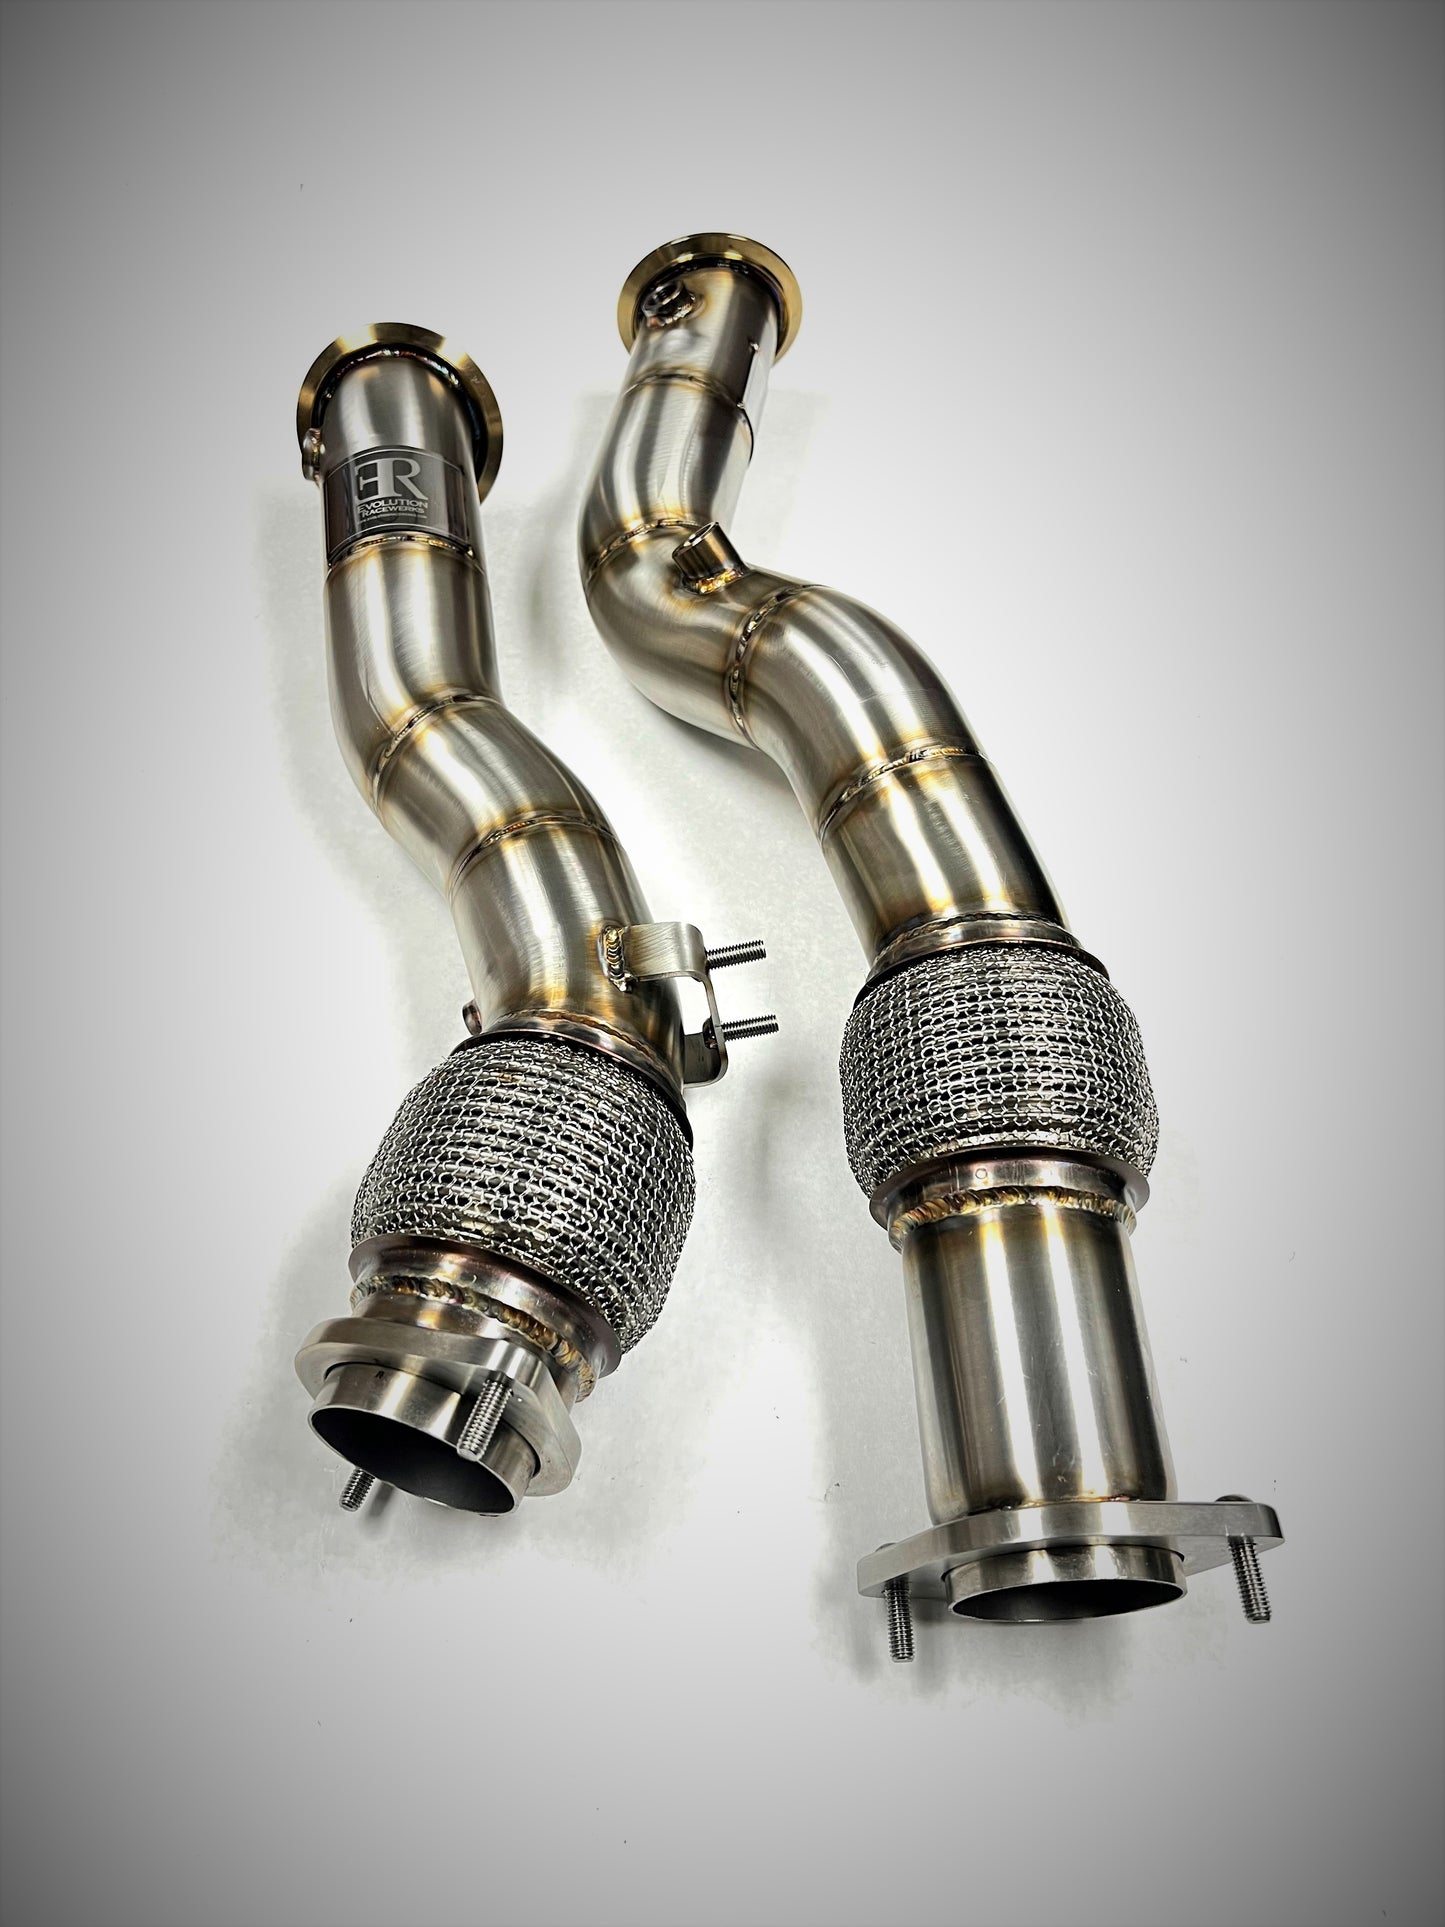 Evolution Racewerks Competition Series Catless Downpipe S58 Engine (2020+ X3M/X4M)